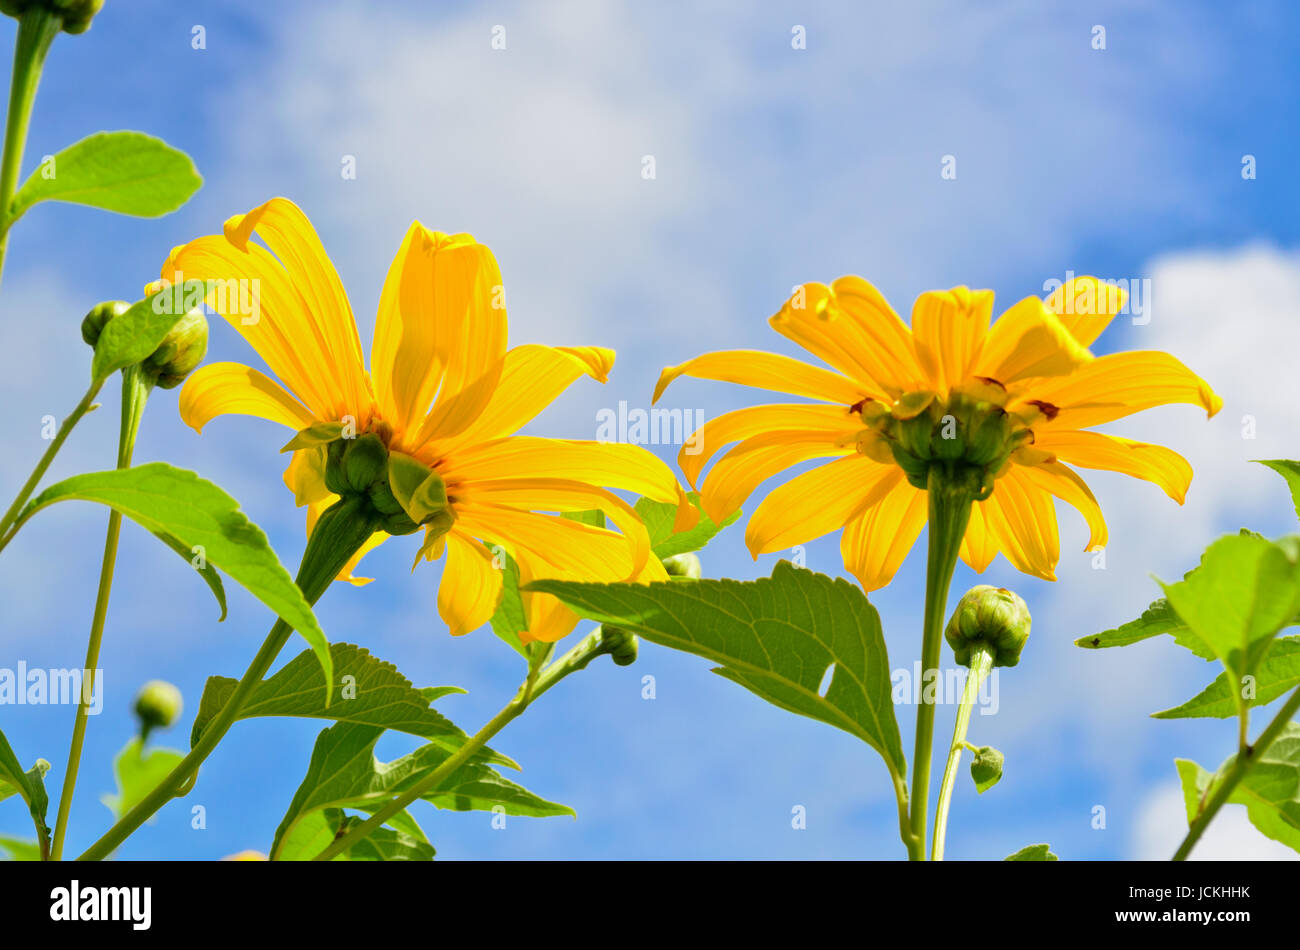 Mexican Sunflower Weed or Tithonia diversifolia, Flowers are bright yellow on blue sky background Stock Photo